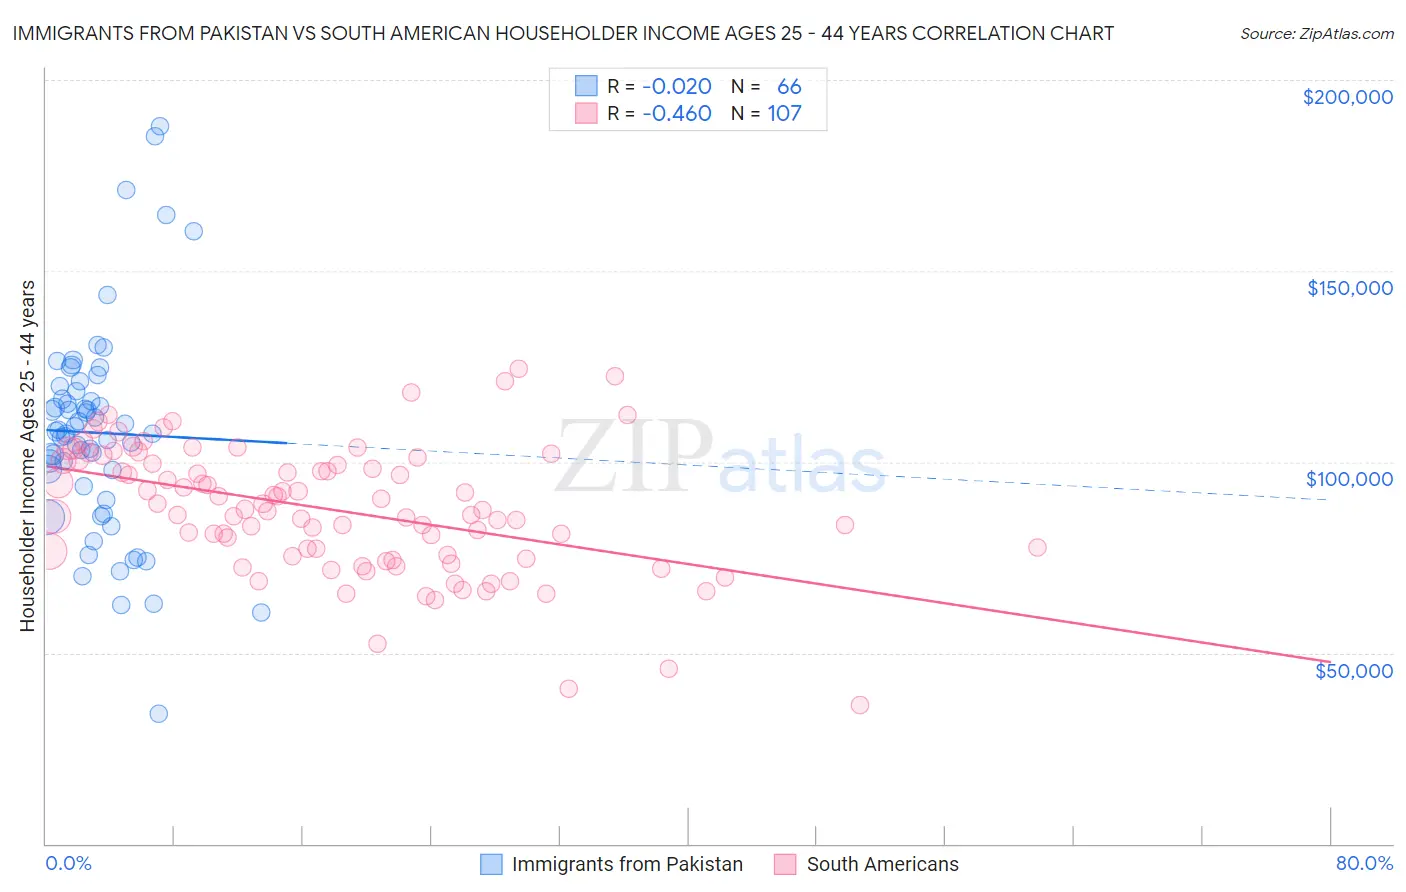 Immigrants from Pakistan vs South American Householder Income Ages 25 - 44 years